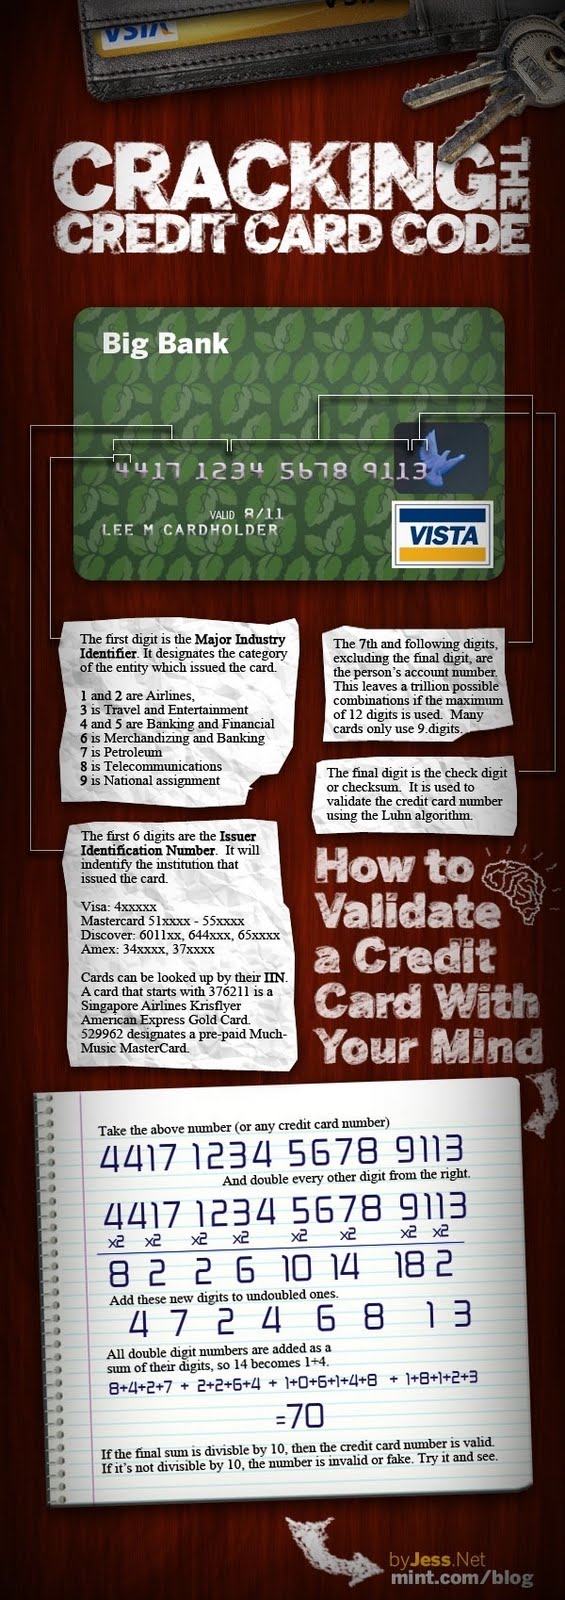 How To Validate A Credit Card With Your Mind